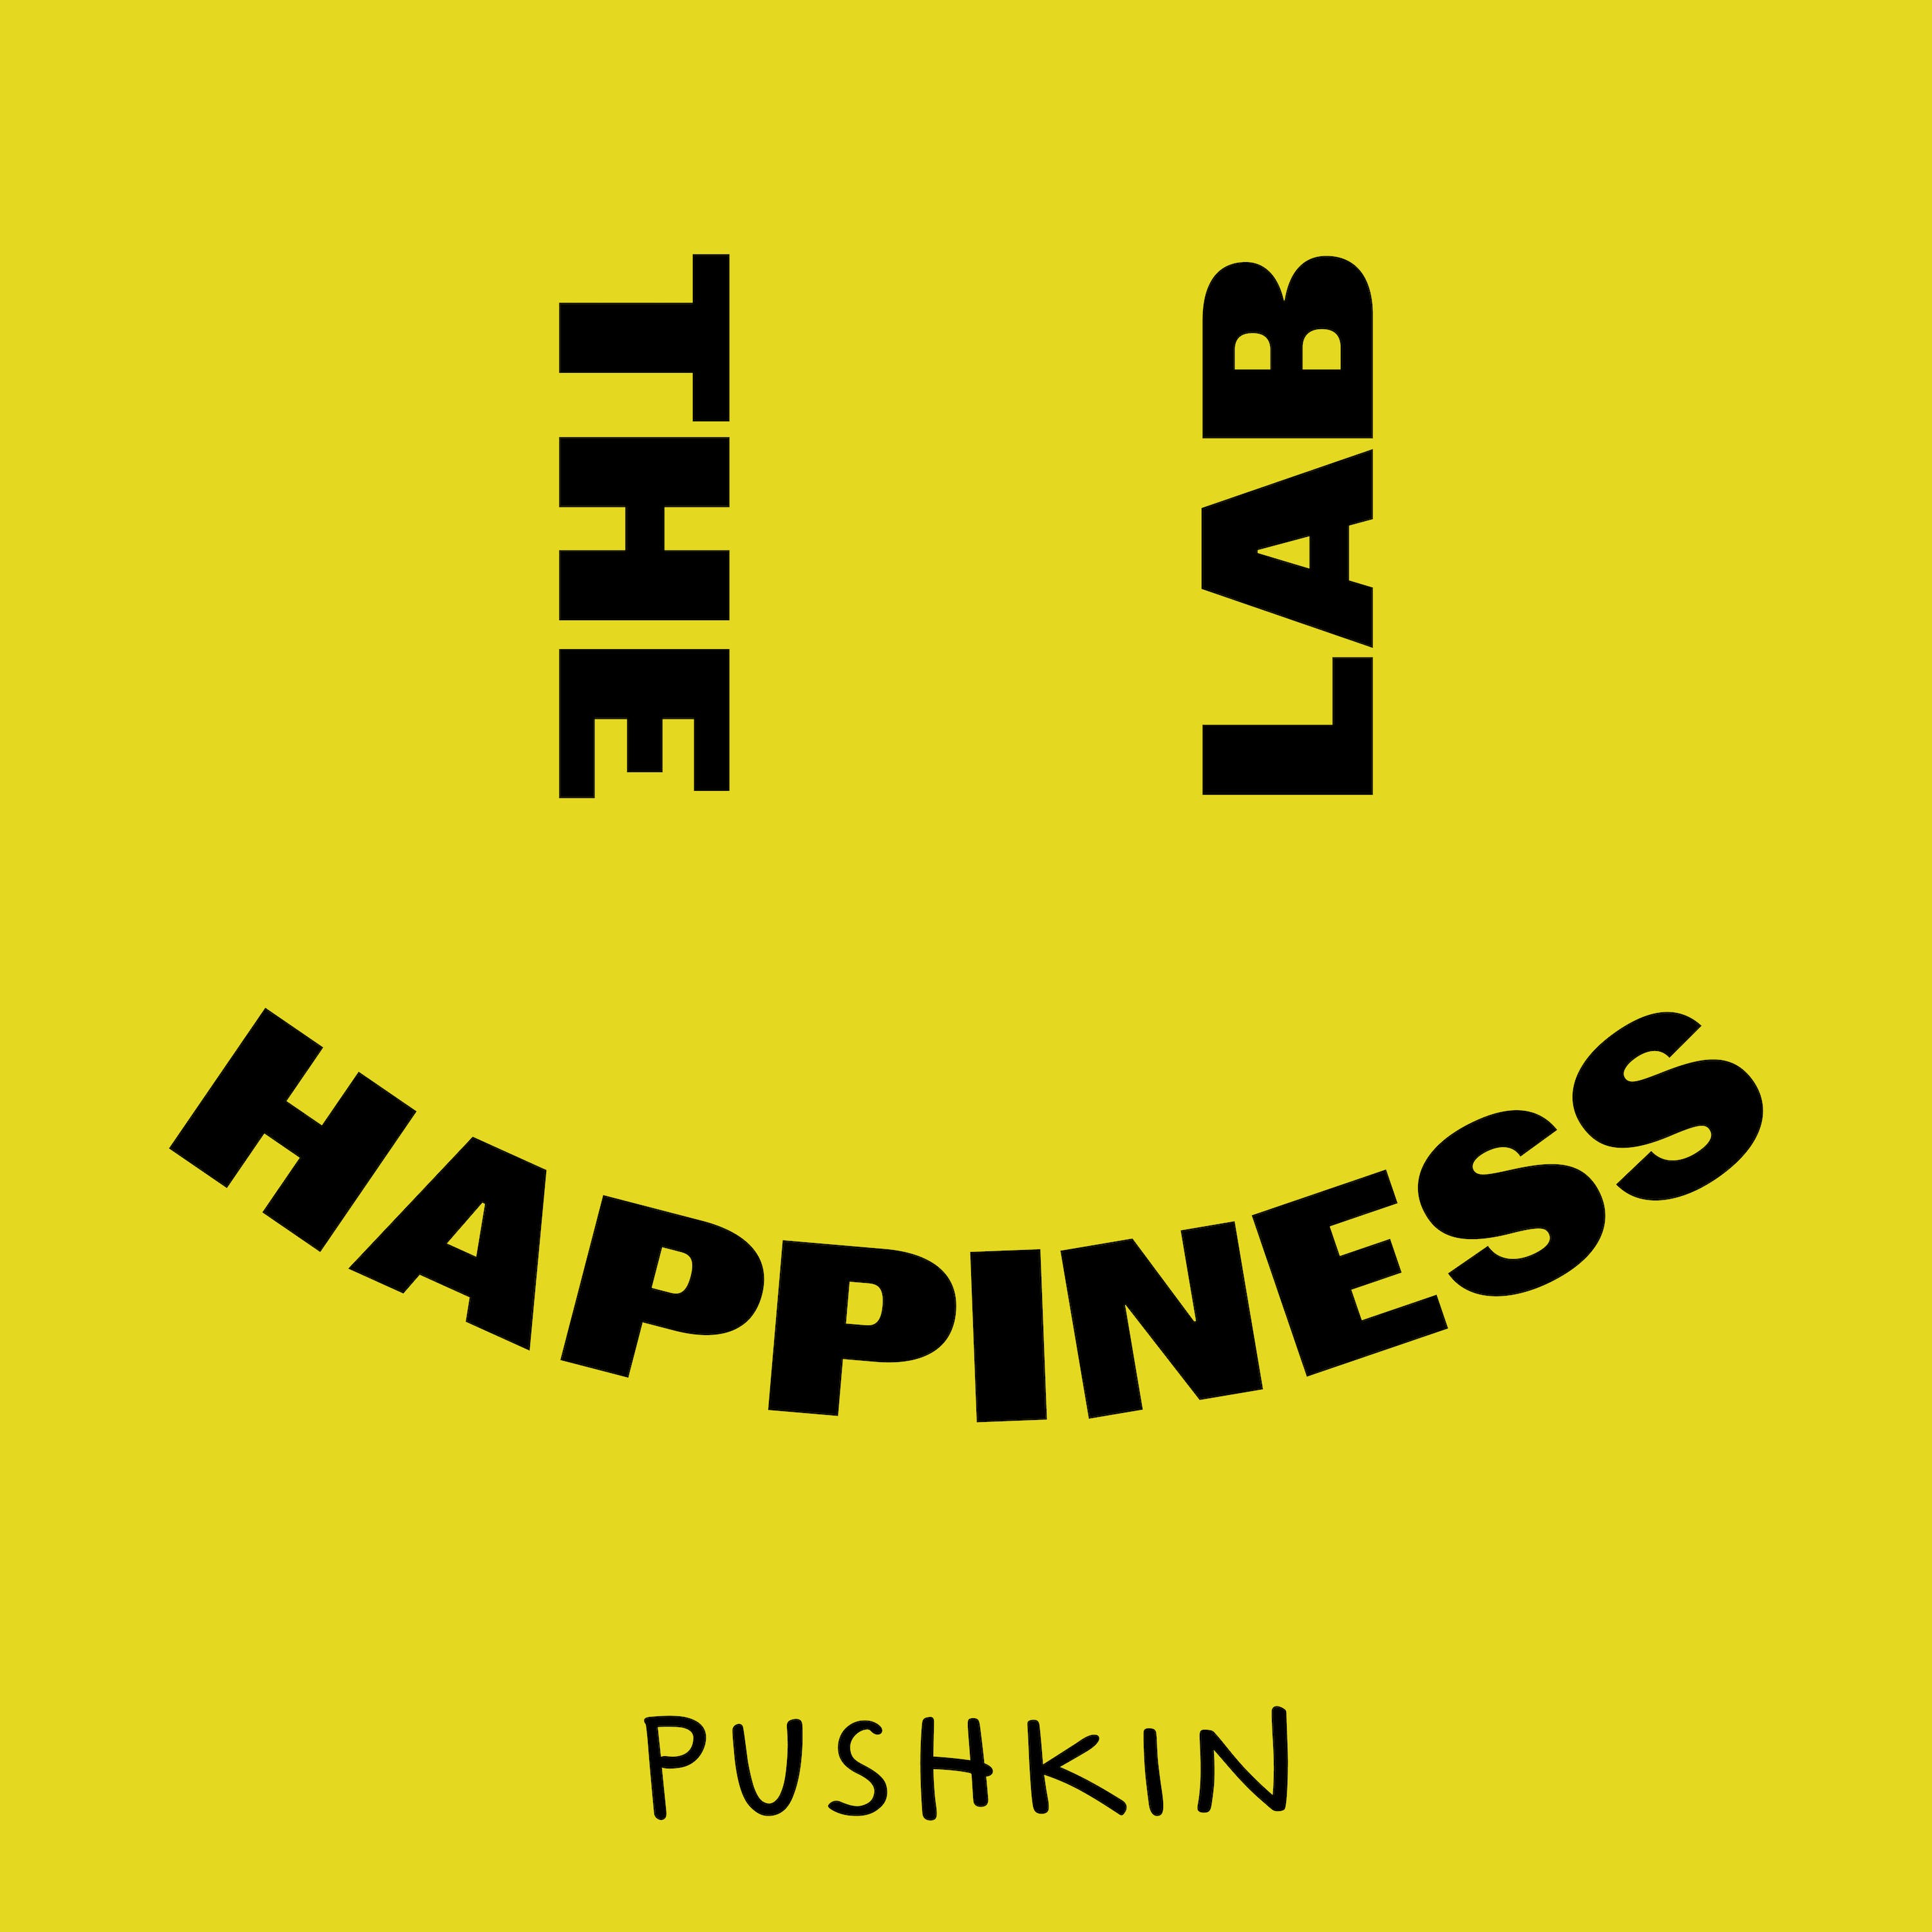 The Joy of Star Trek, The Grateful Dead and Hot Sauce: The Happiness Lab Returns September 6 by Pushkin Industries